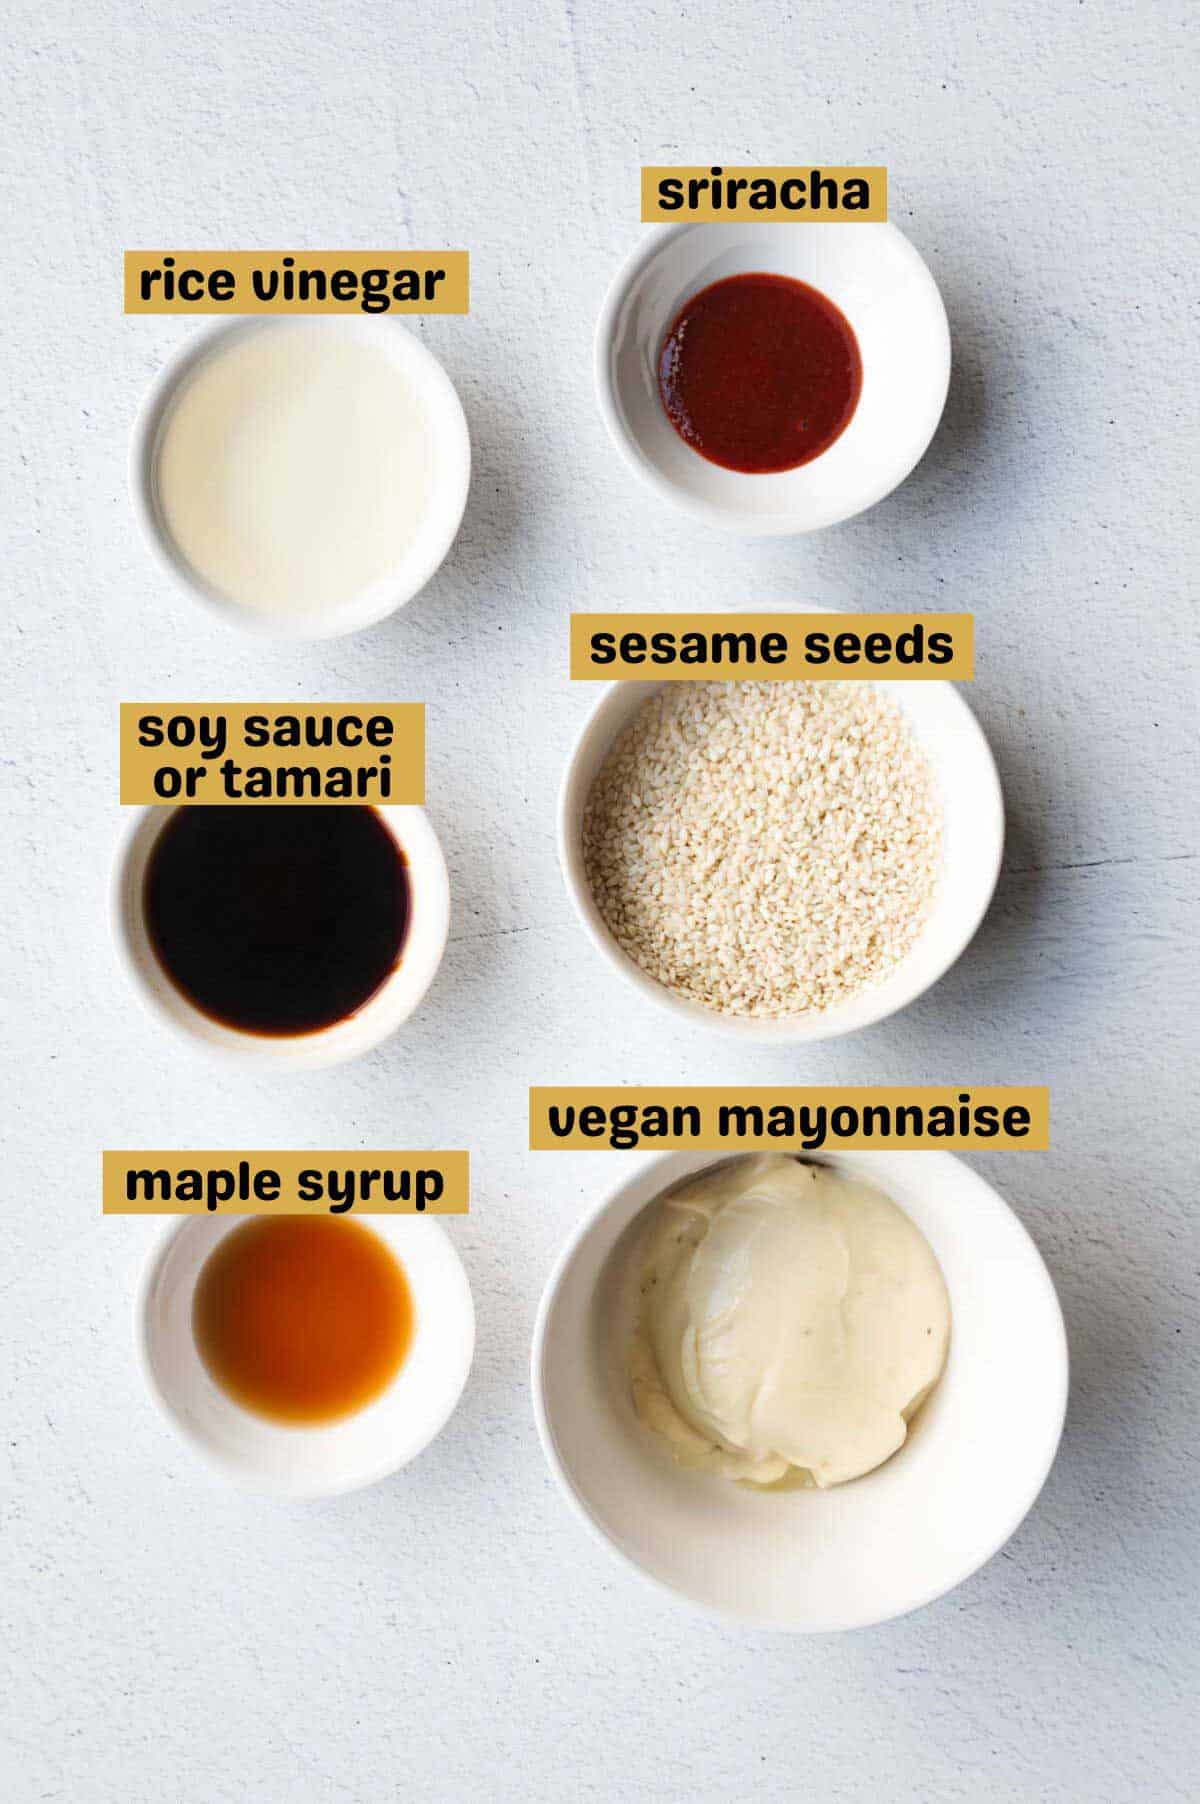 Sriracha, rice vinegar, sesame seeds, soy sauce, vegan mayonnaise, and maple syrup in white bowls.